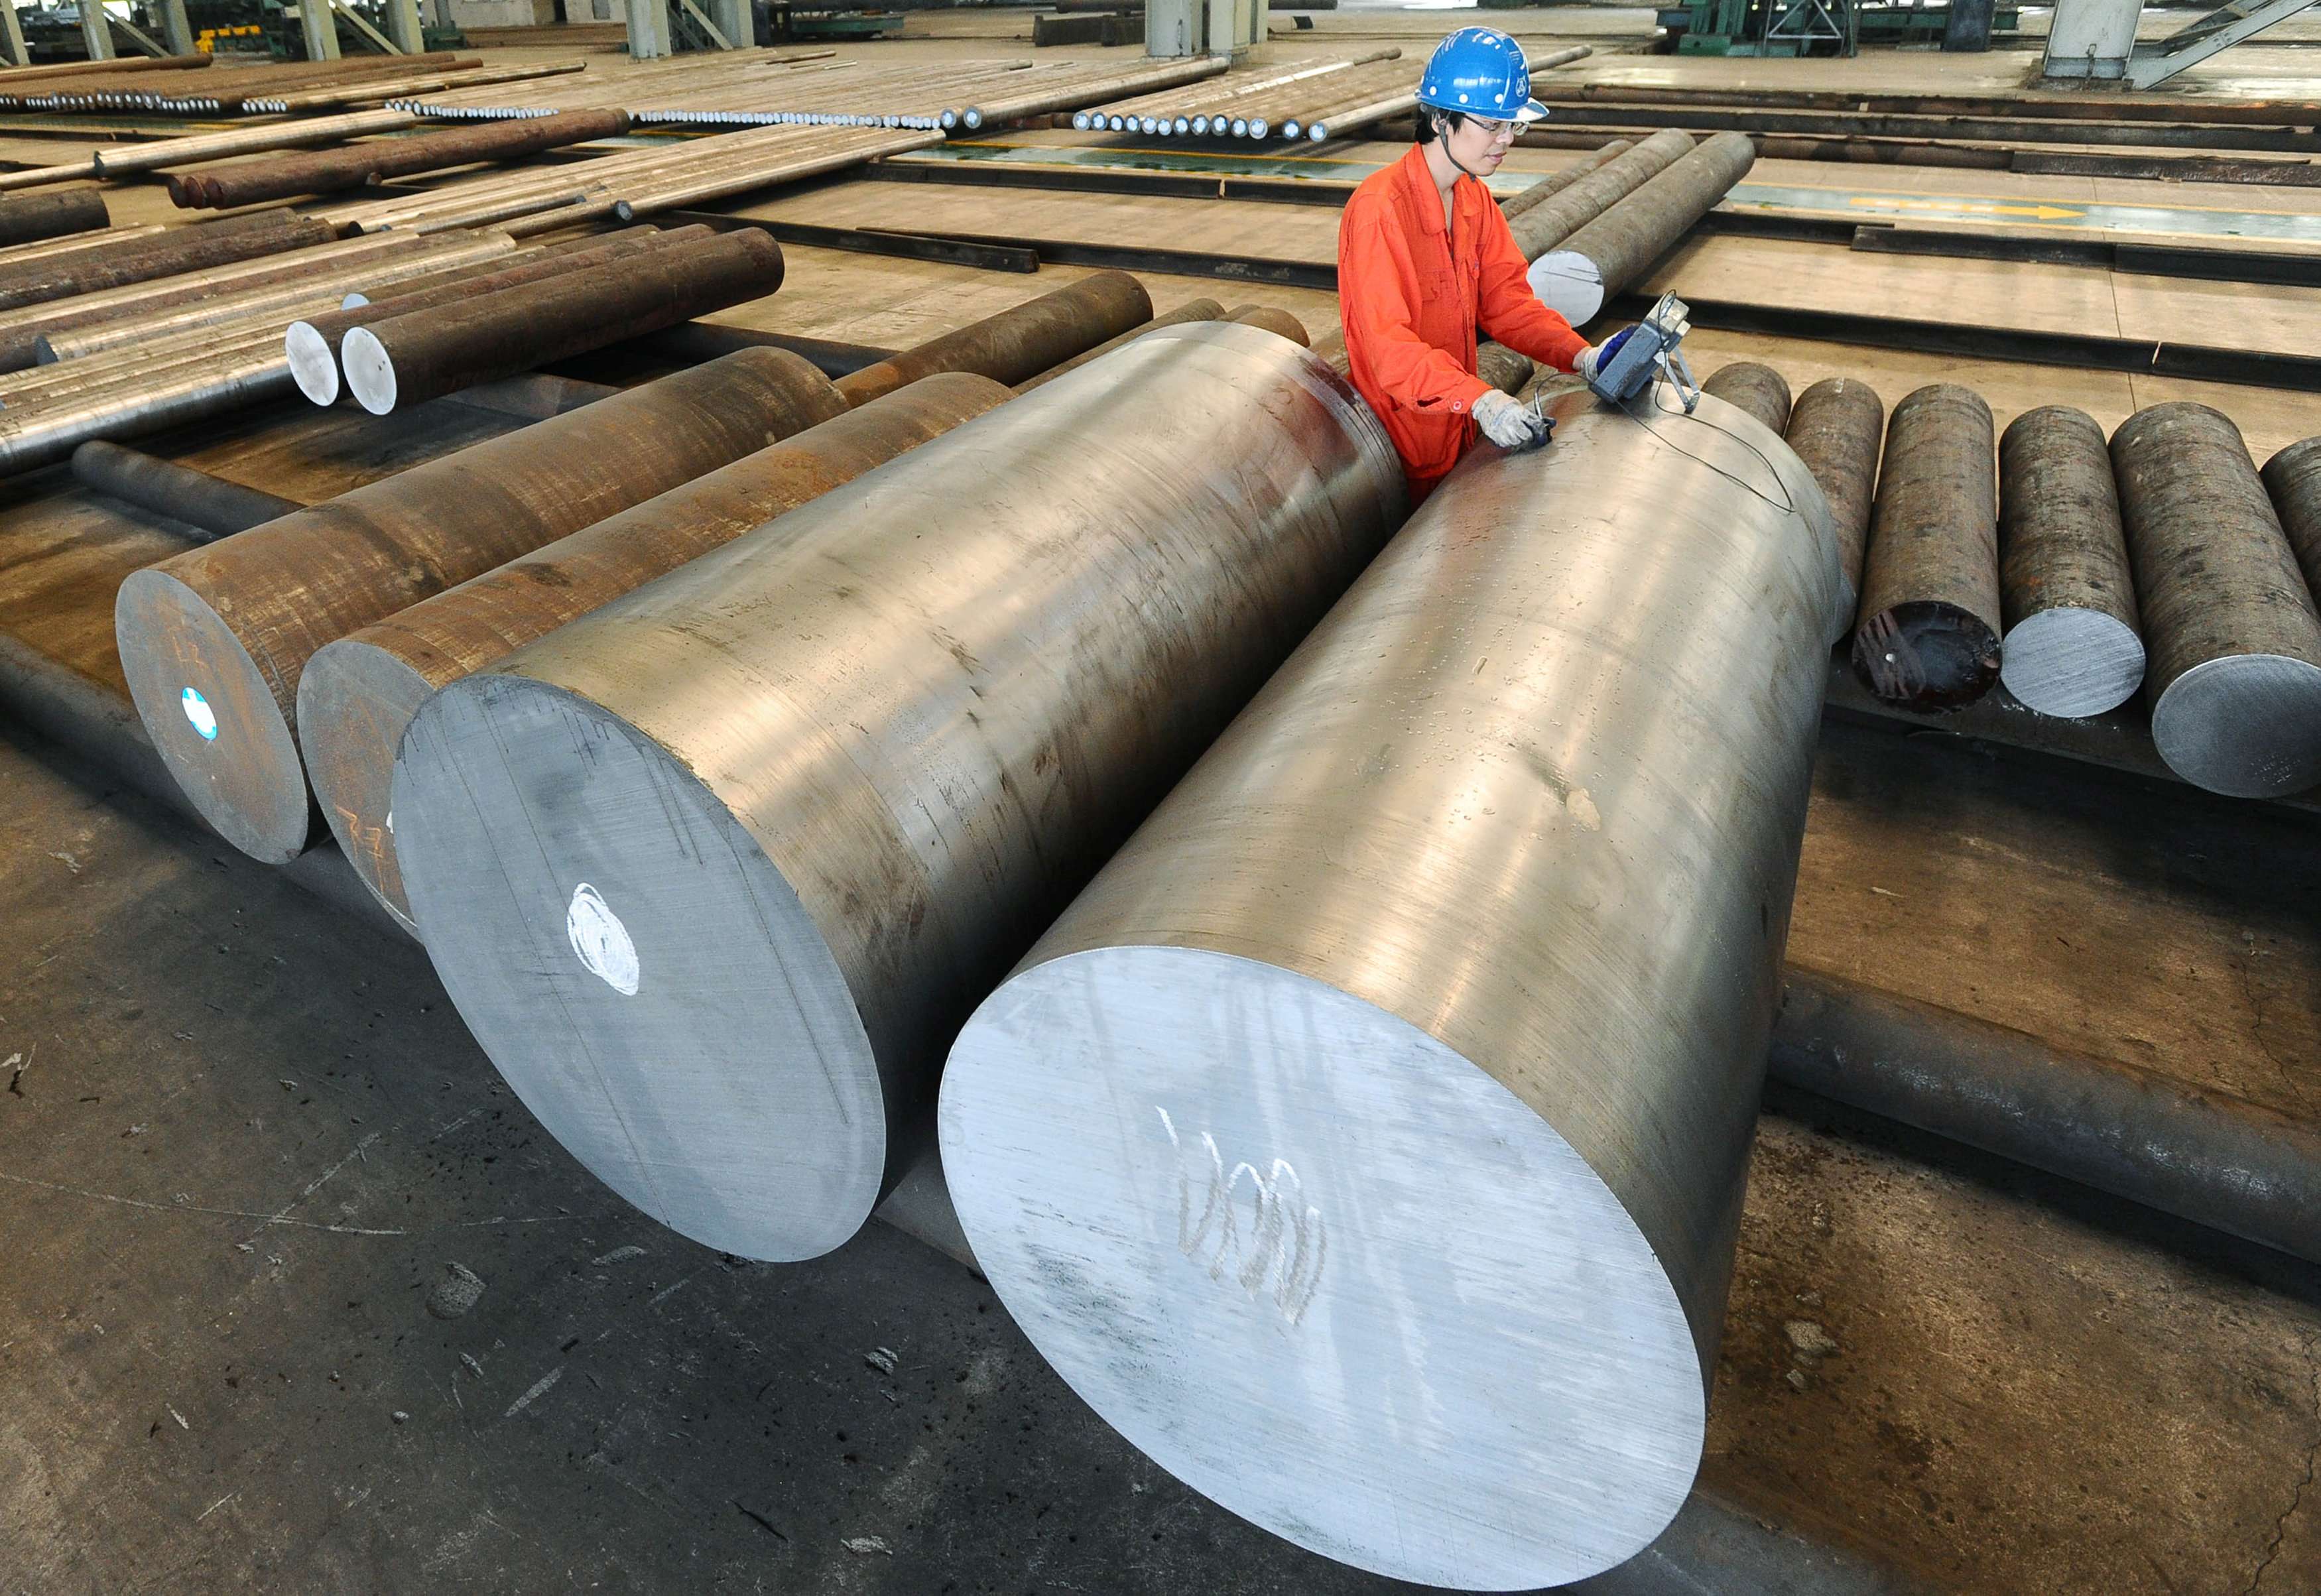 The wild price swings seen recently in commodities such as steel may have spooked overseas investors, analysts say. Photo: Reuters